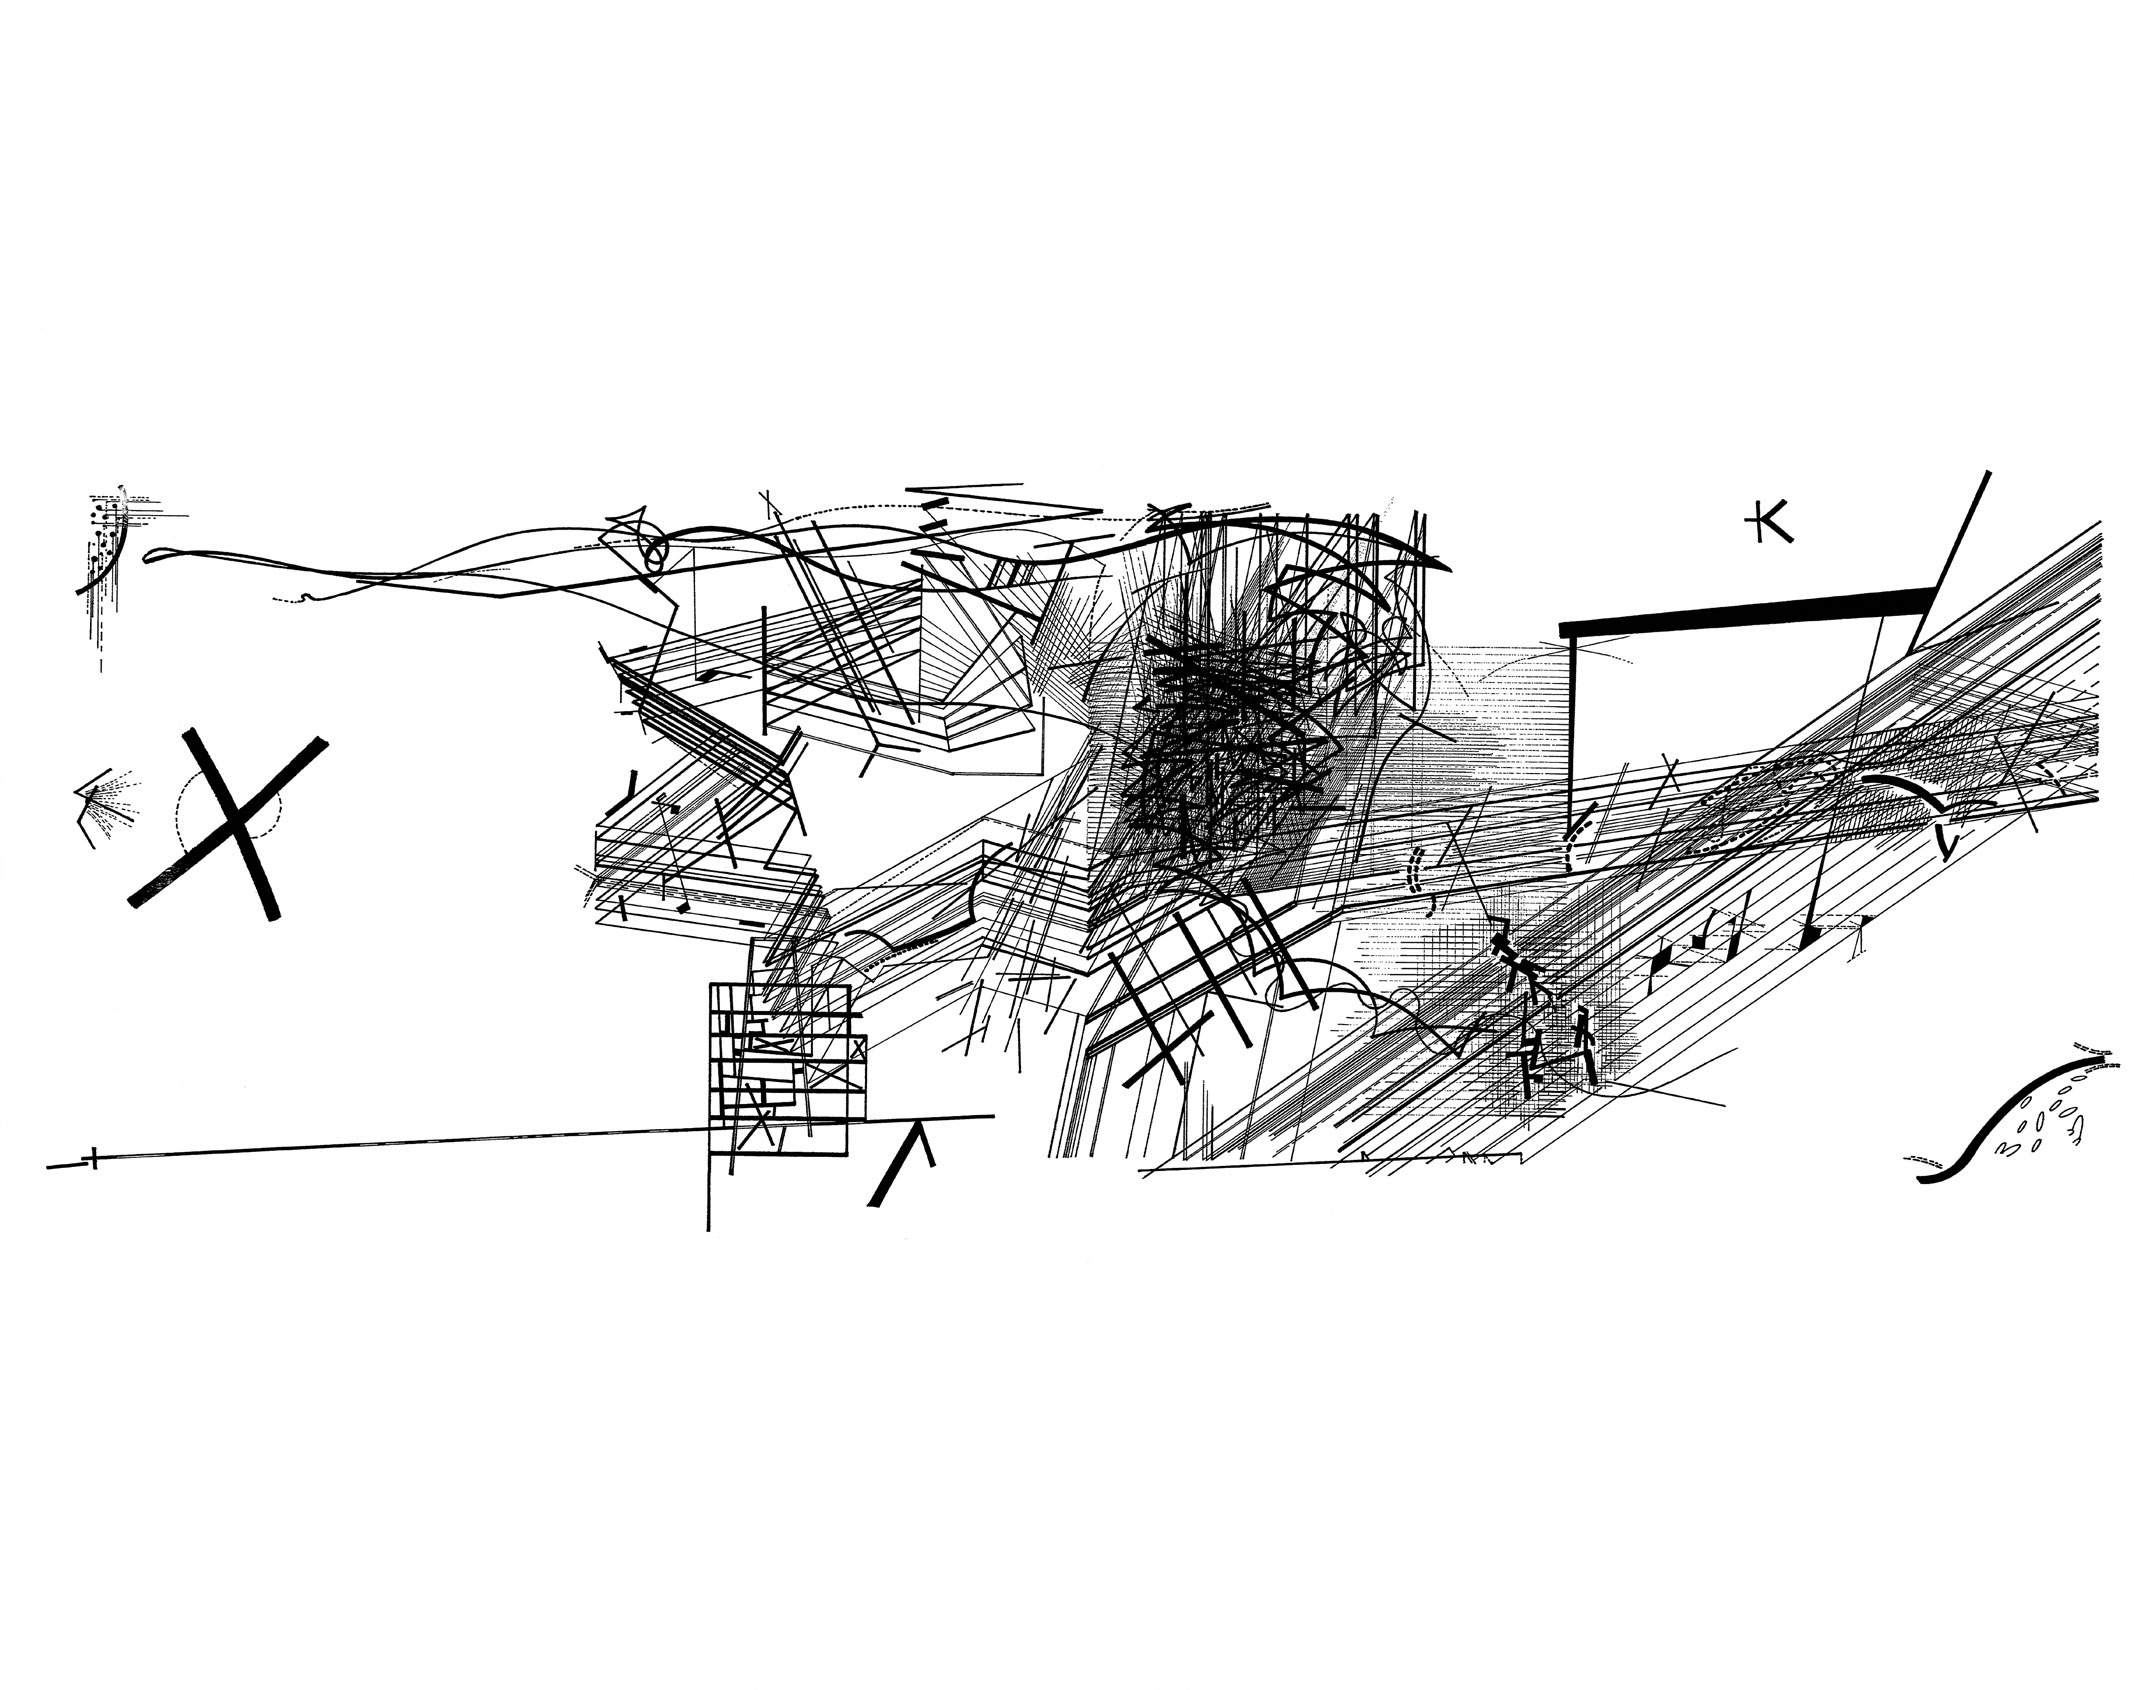 Chamber Works drawing by Daniel Libeskind 1983 Image courtesy of   Download Scientific Diagram